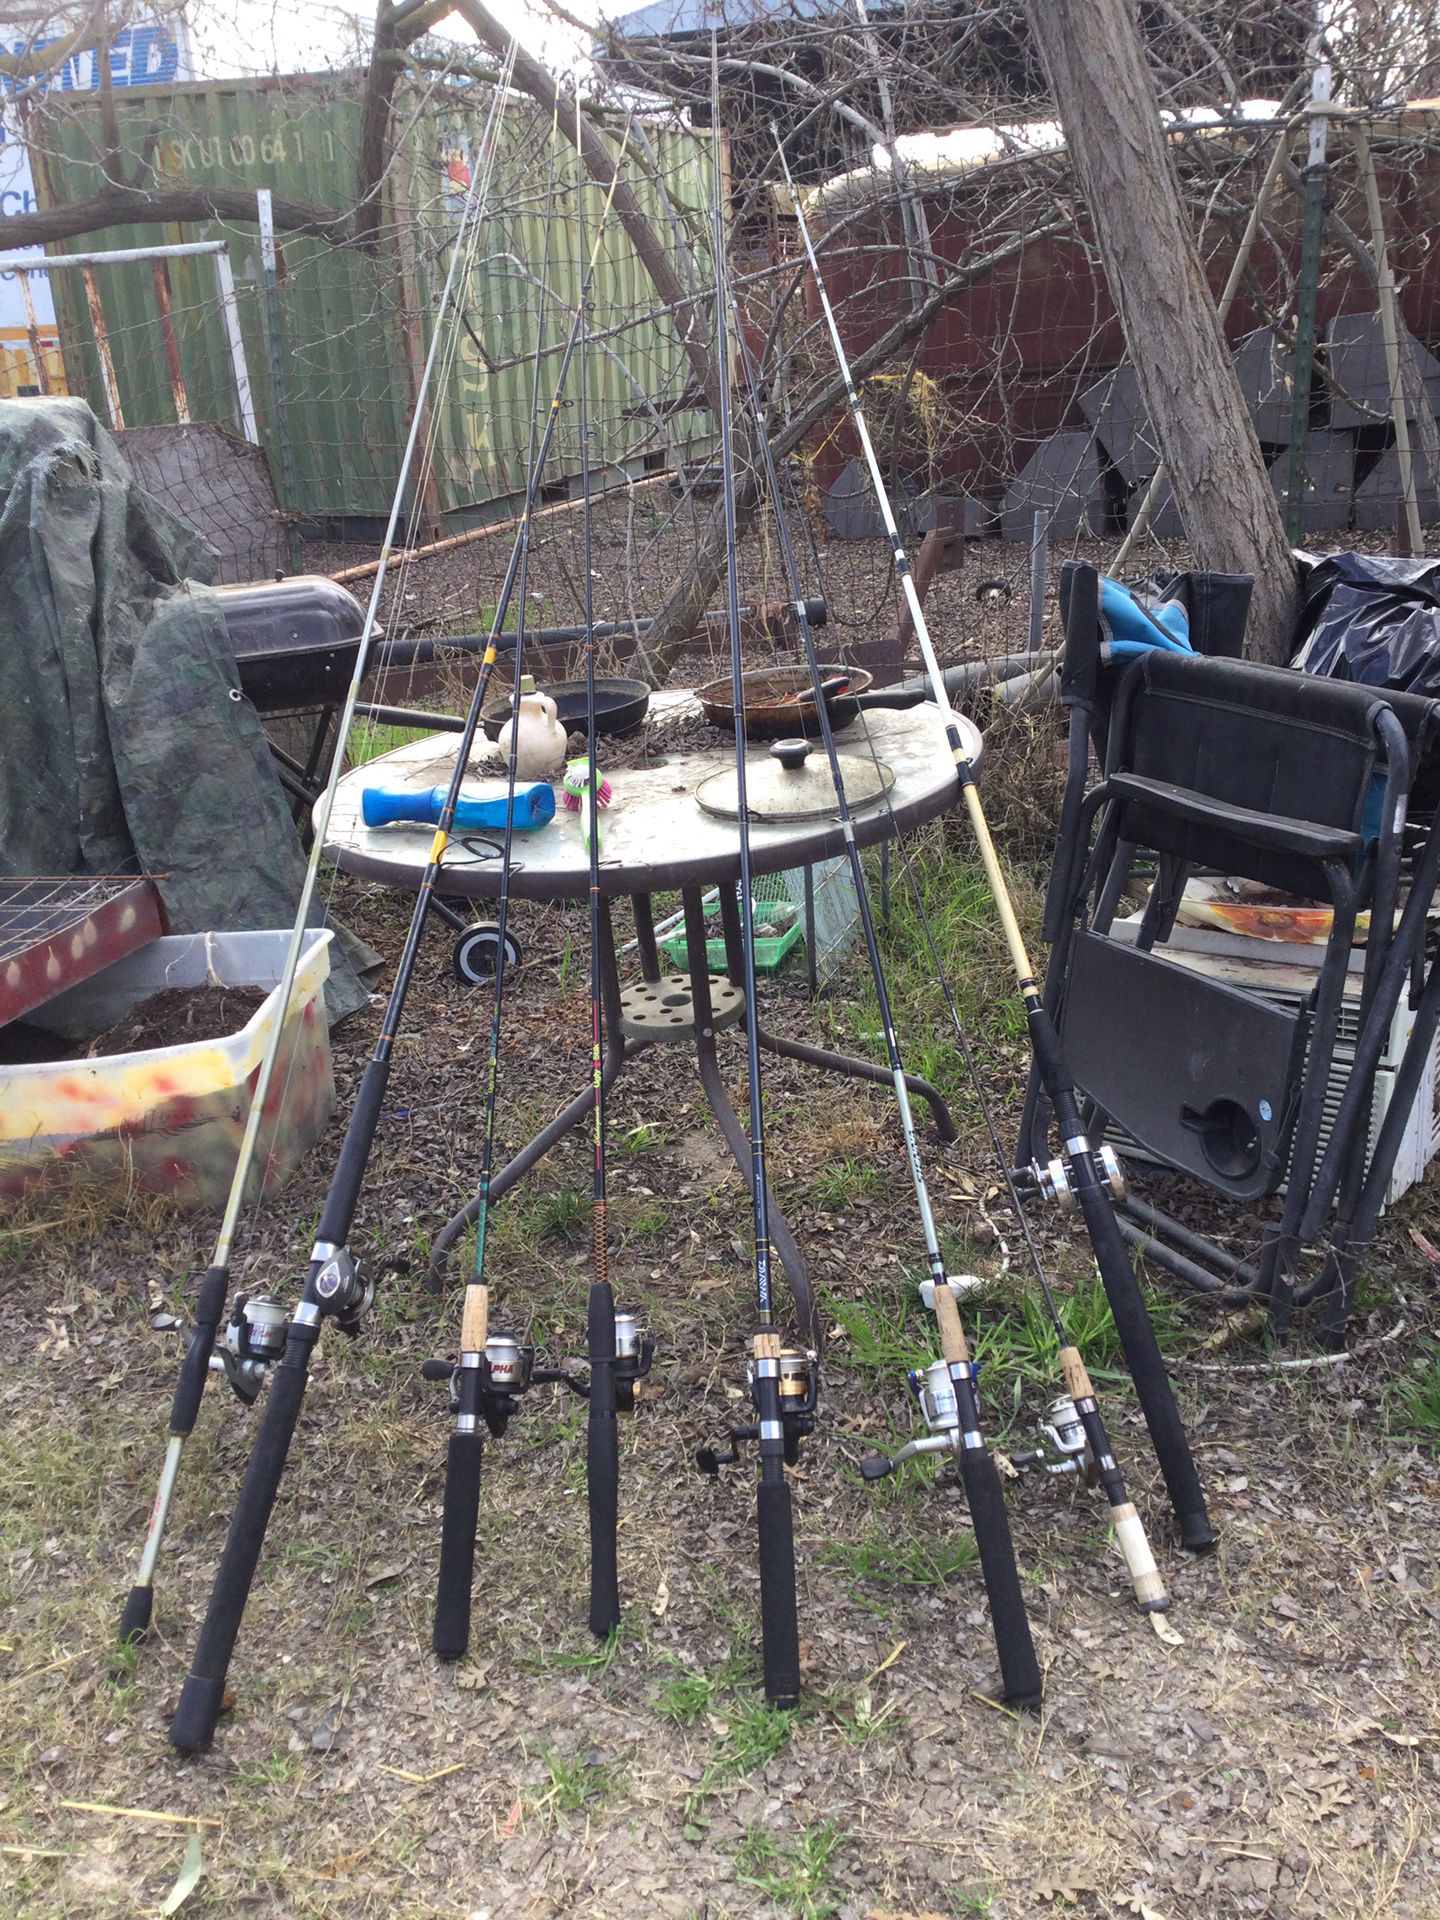 Fishing poles for sell will sale all together are let me no what u are interested in